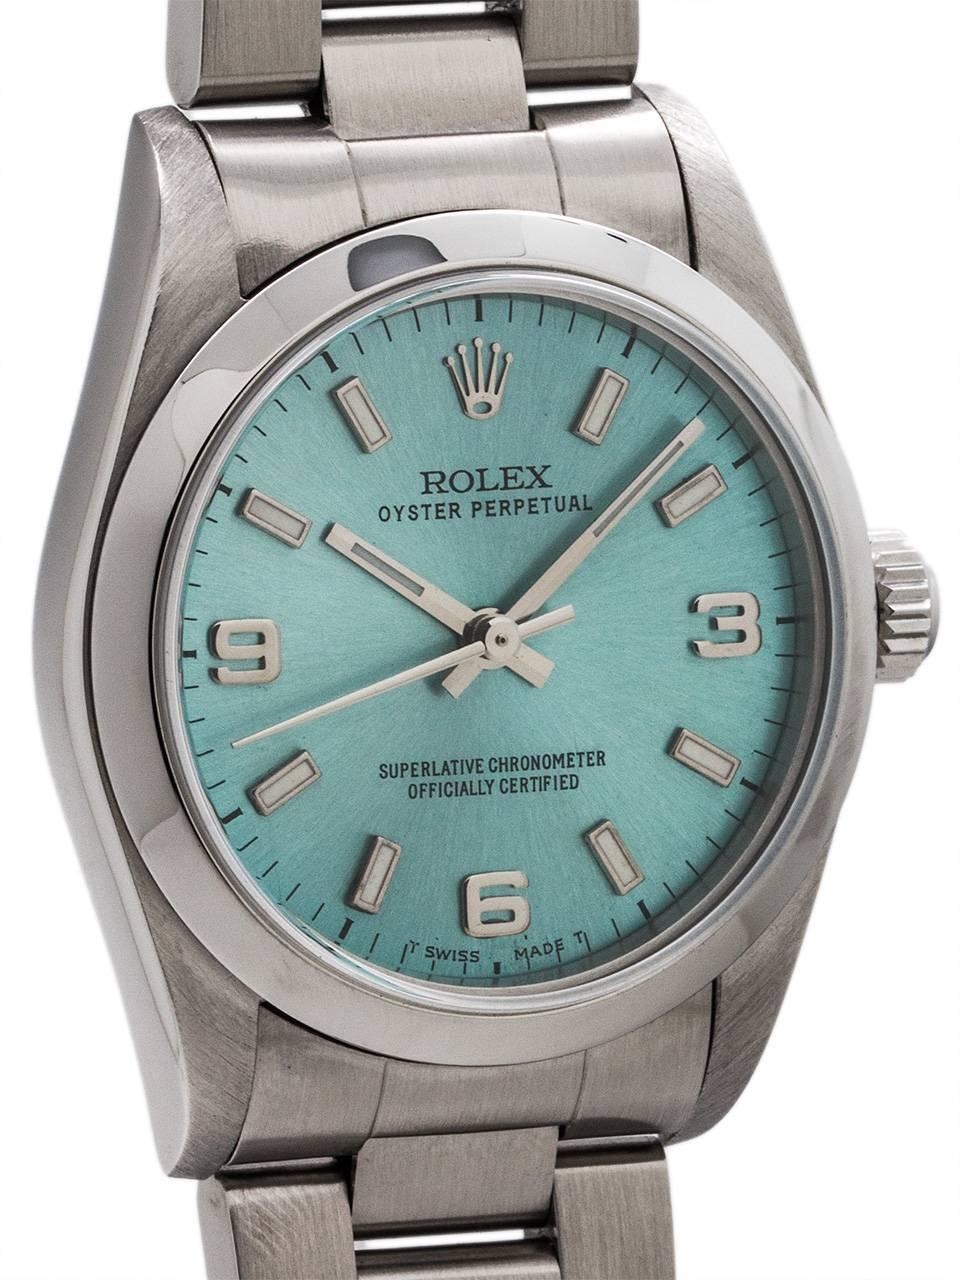 Rolex Oyster Perpetual midsize model ref 77080 stainless steel circa 2001. Featuring 31mm diameter case with smooth bezel and sapphire crystal and custom colored “Ice Blue” dial with popular 3/6/9 Explorer style configuration. Powered by self